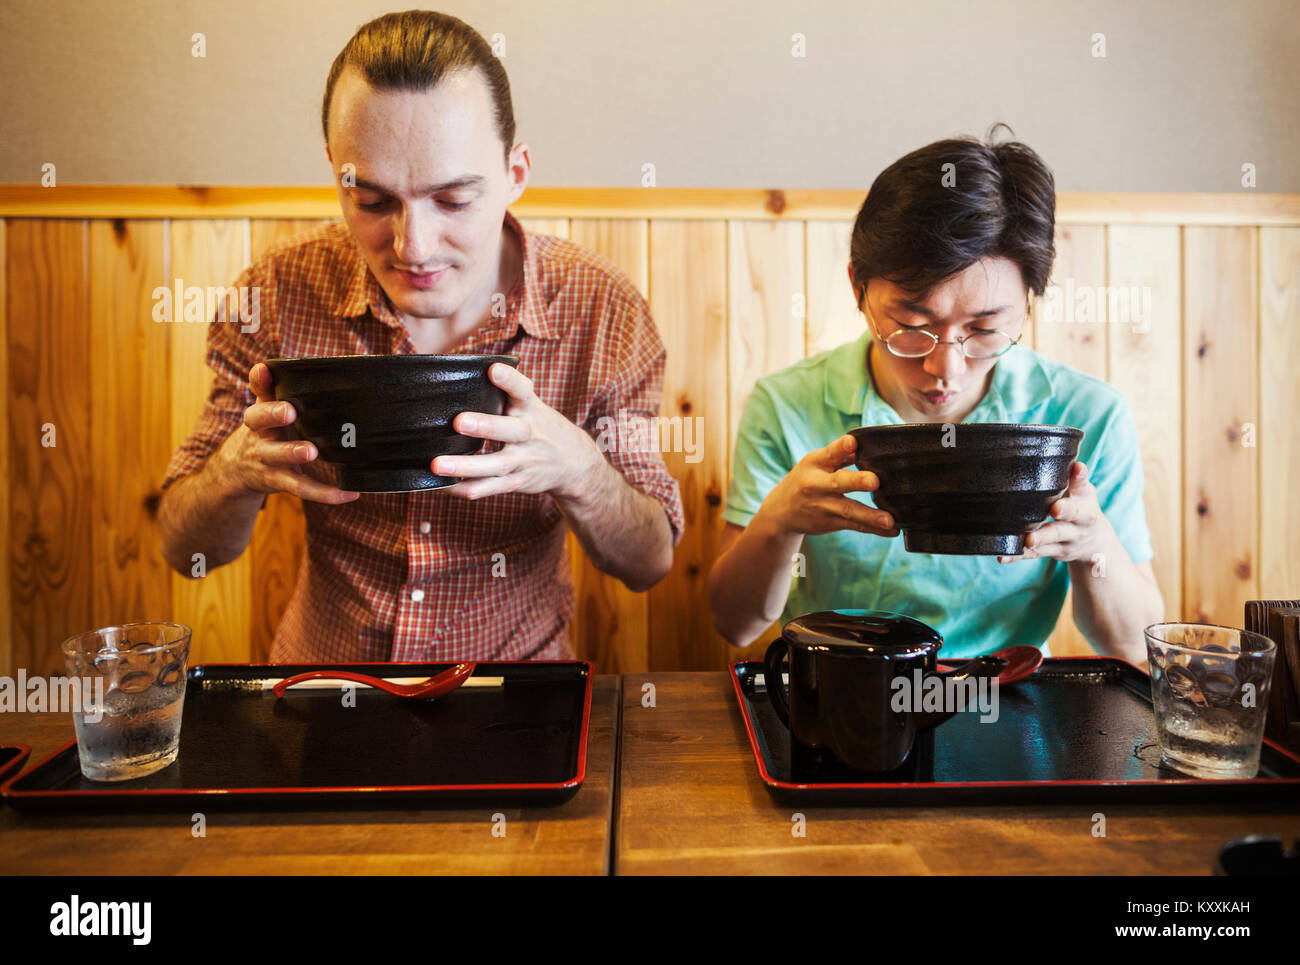 Two people in a noodle cafe lifting bowls of soba noodles. A western man and a Japanese man. Stock Photo